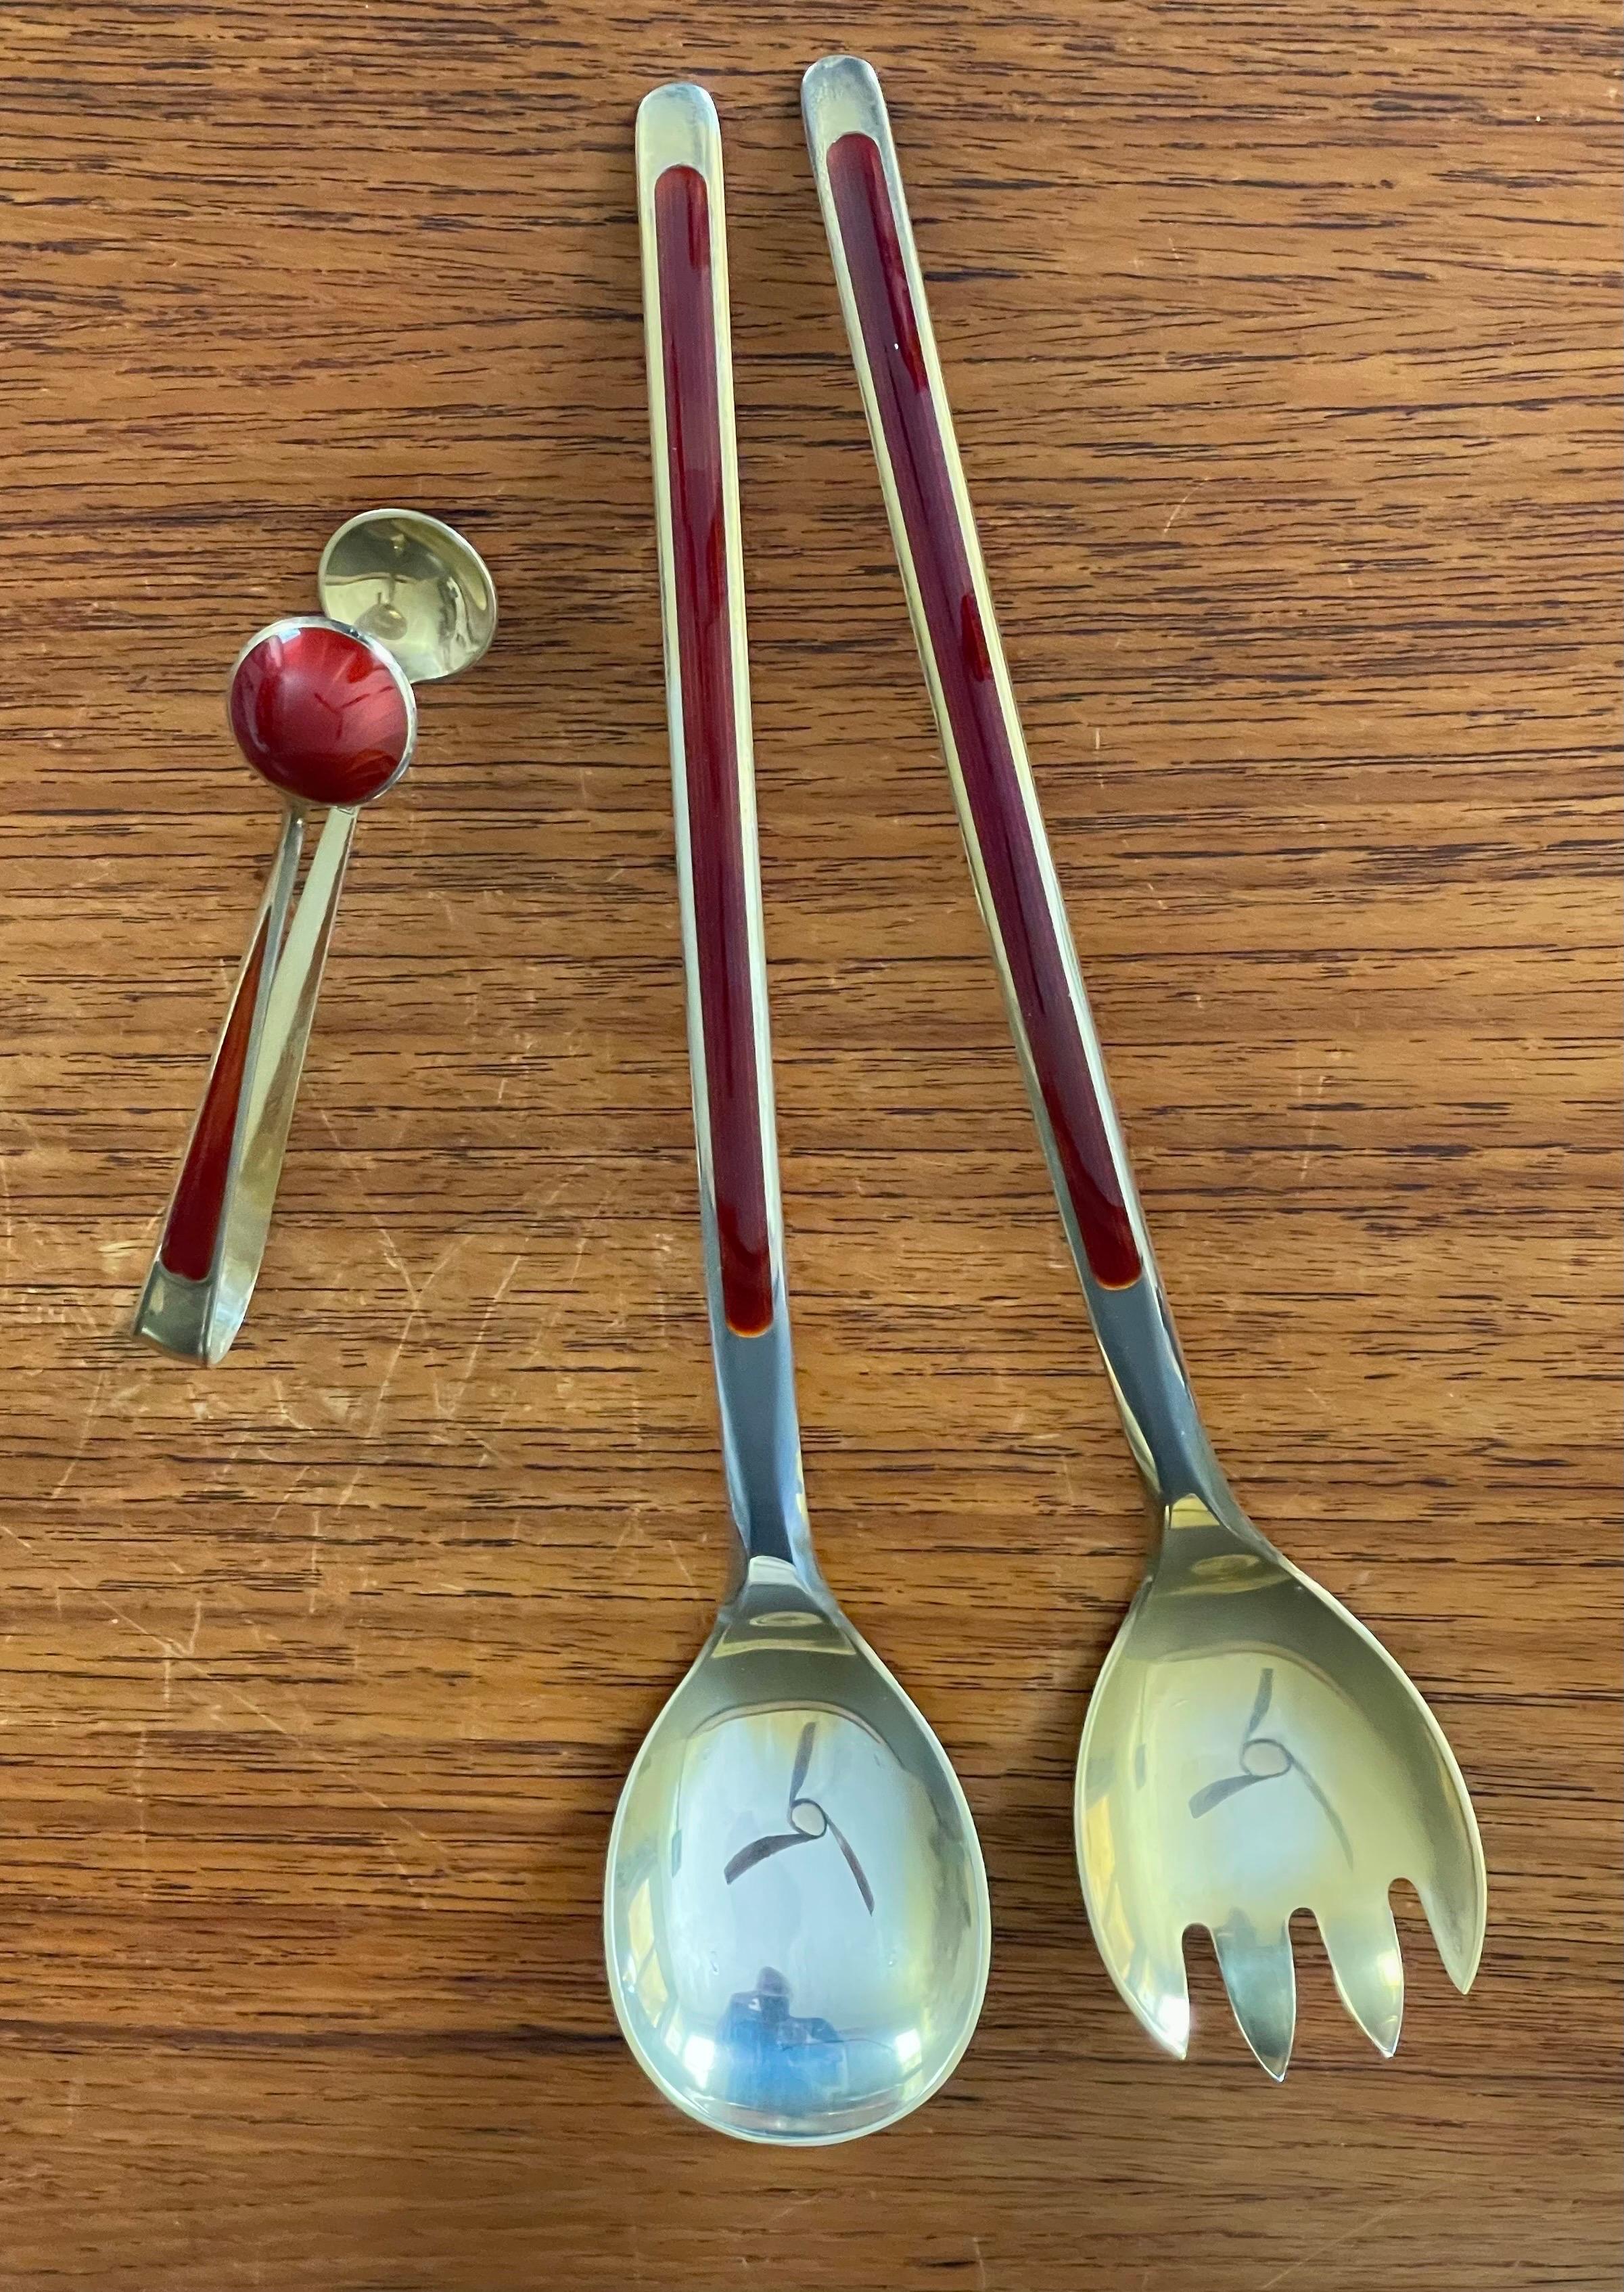 Scandinavian Modern MCM Stylized Set of Salad Servers in Sterling Silver and Enamel by N.M. Thune For Sale